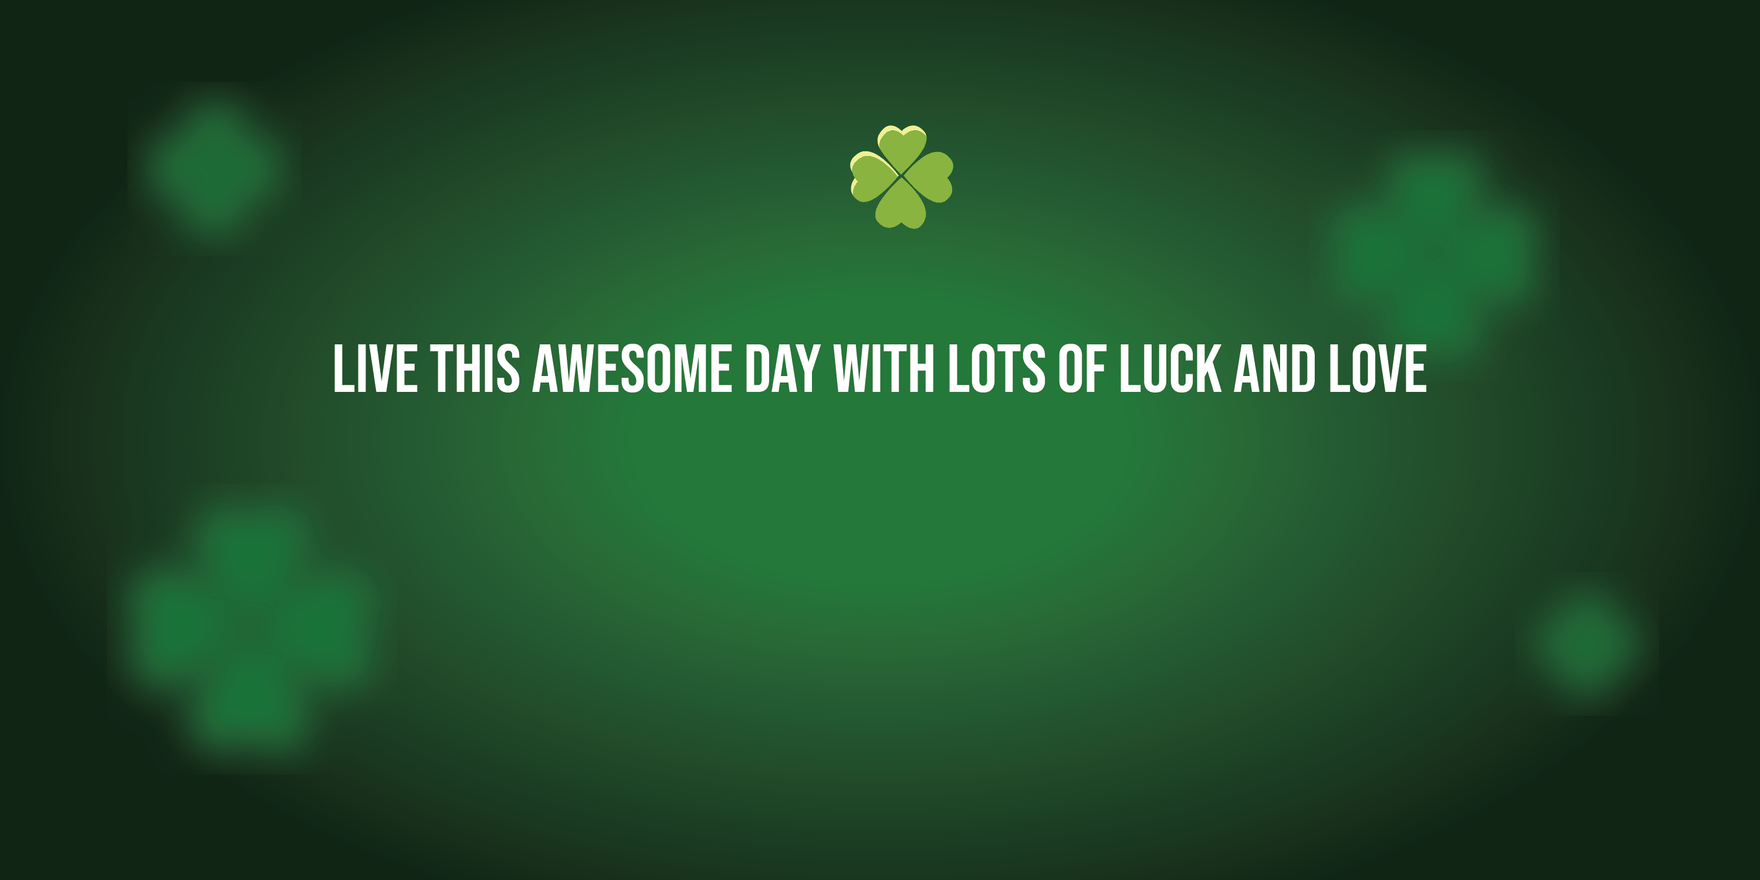 Free St. Patrick's Day Youtube Cover in Illustrator, PSD, EPS, JPG, PNG